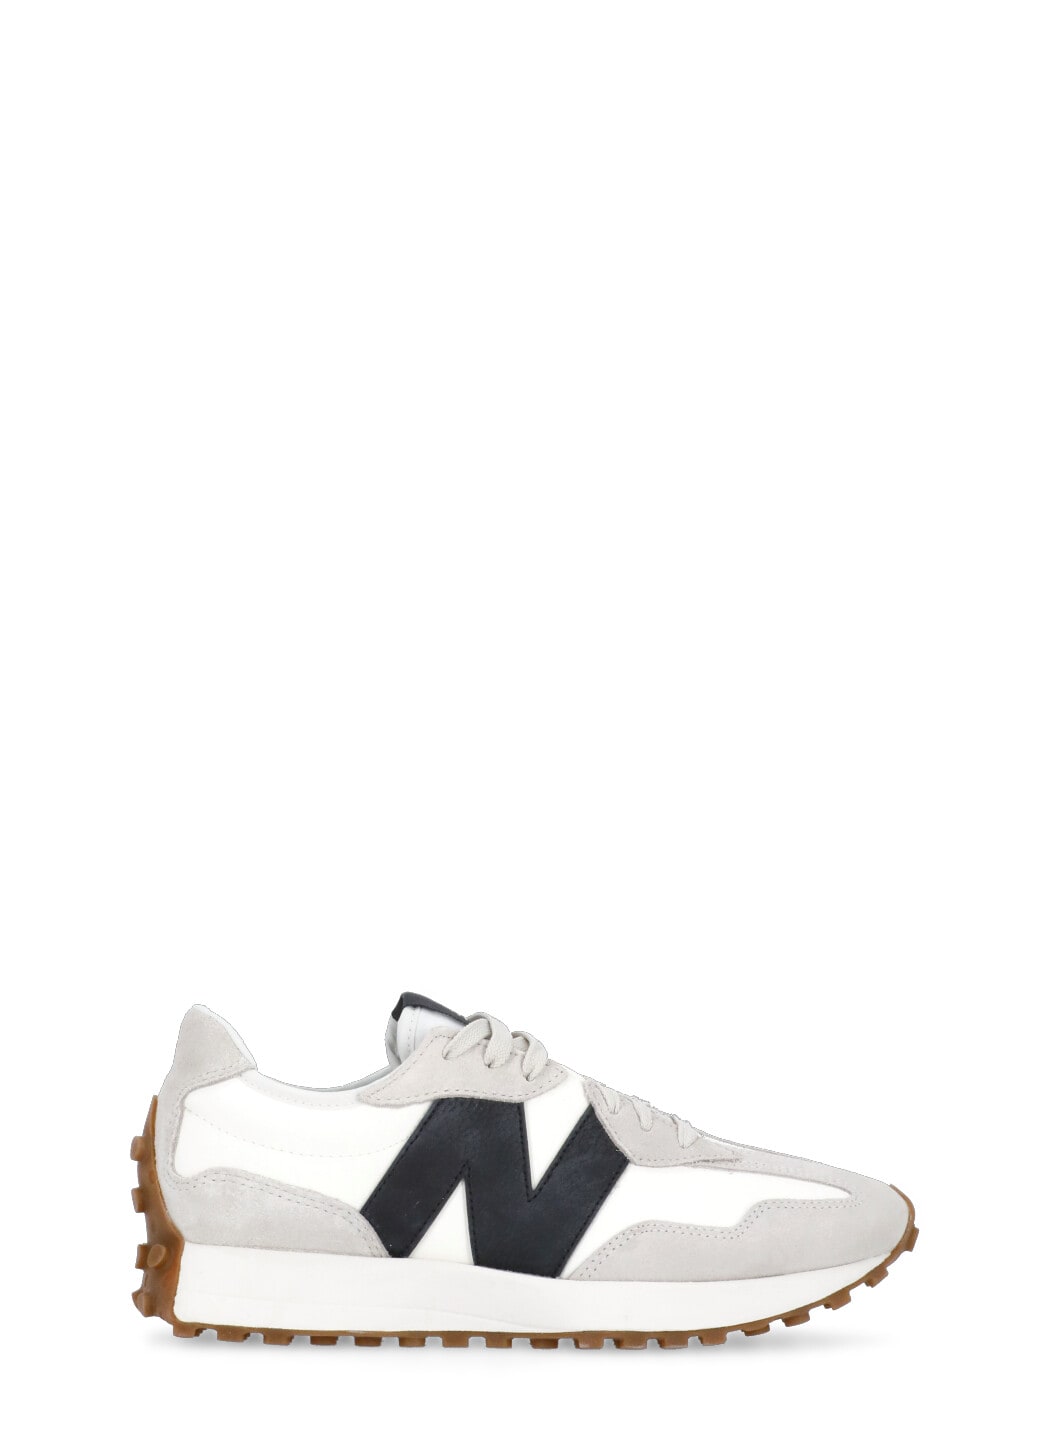 NEW BALANCE 327 SNEAKERS